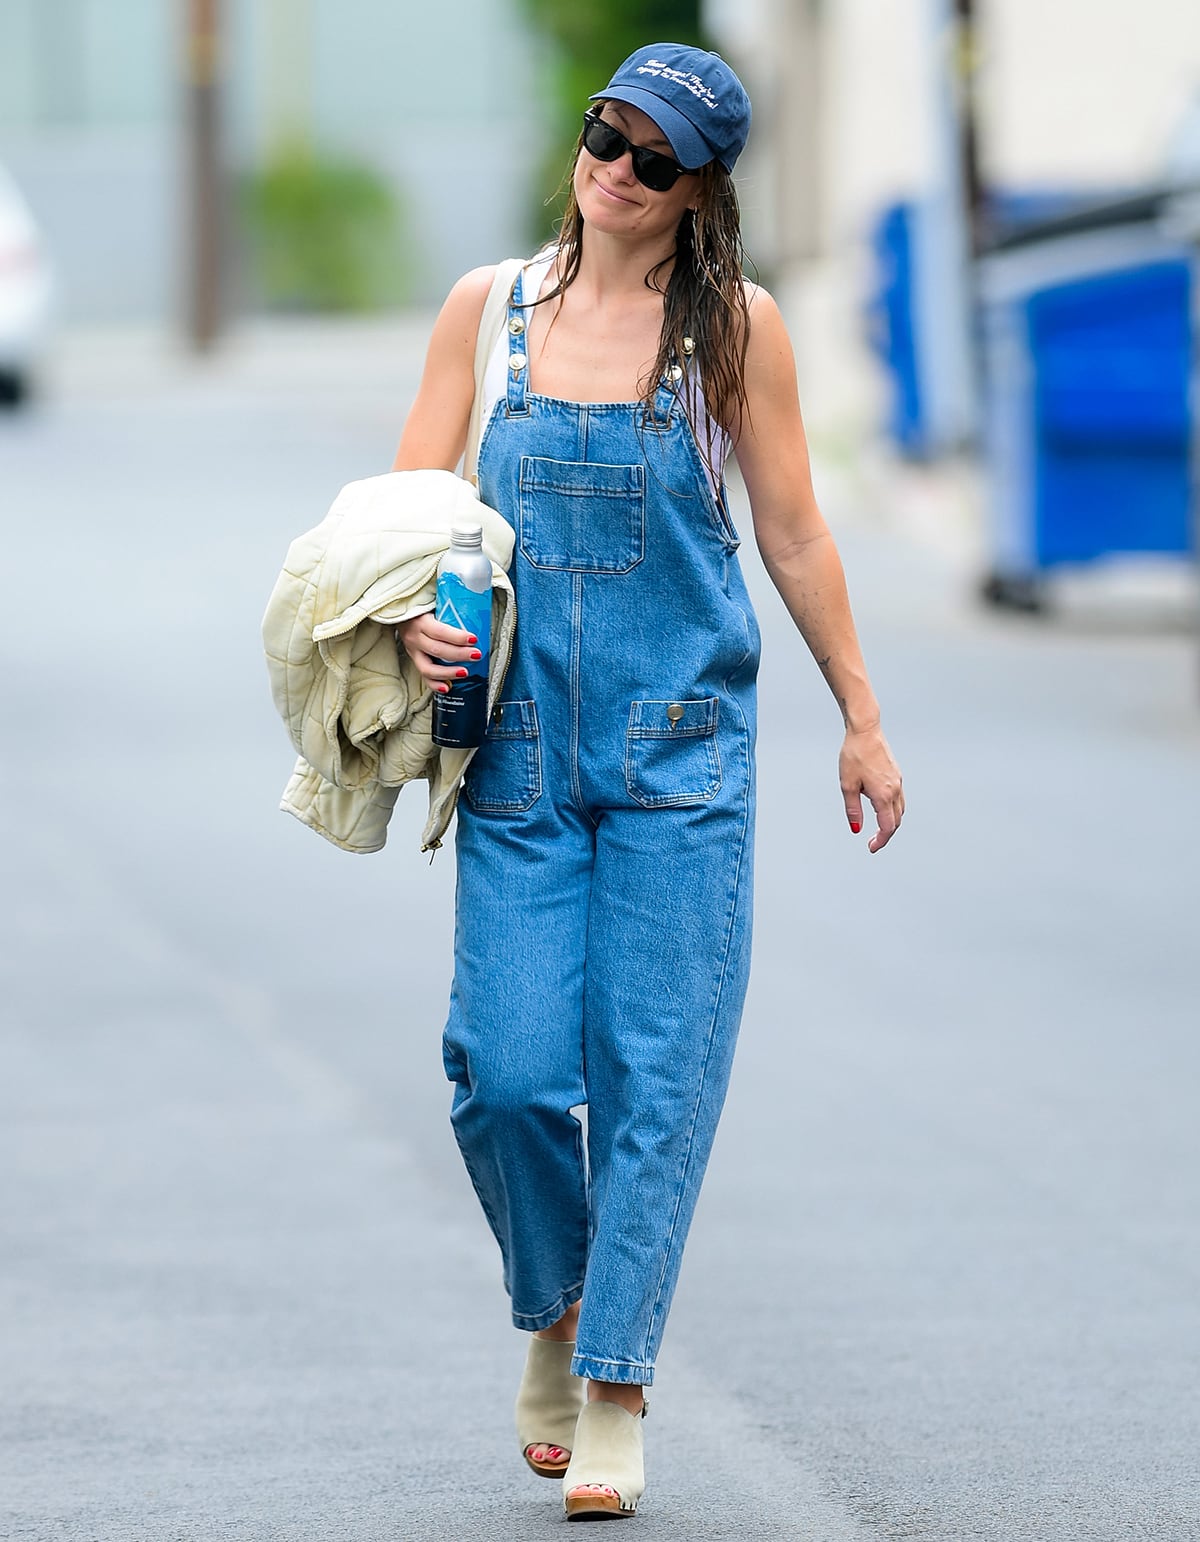 Olivia Wilde leaving the gym in a denim jumpsuit by Sezane and a white tank top by La Ligne on June 8, 2023